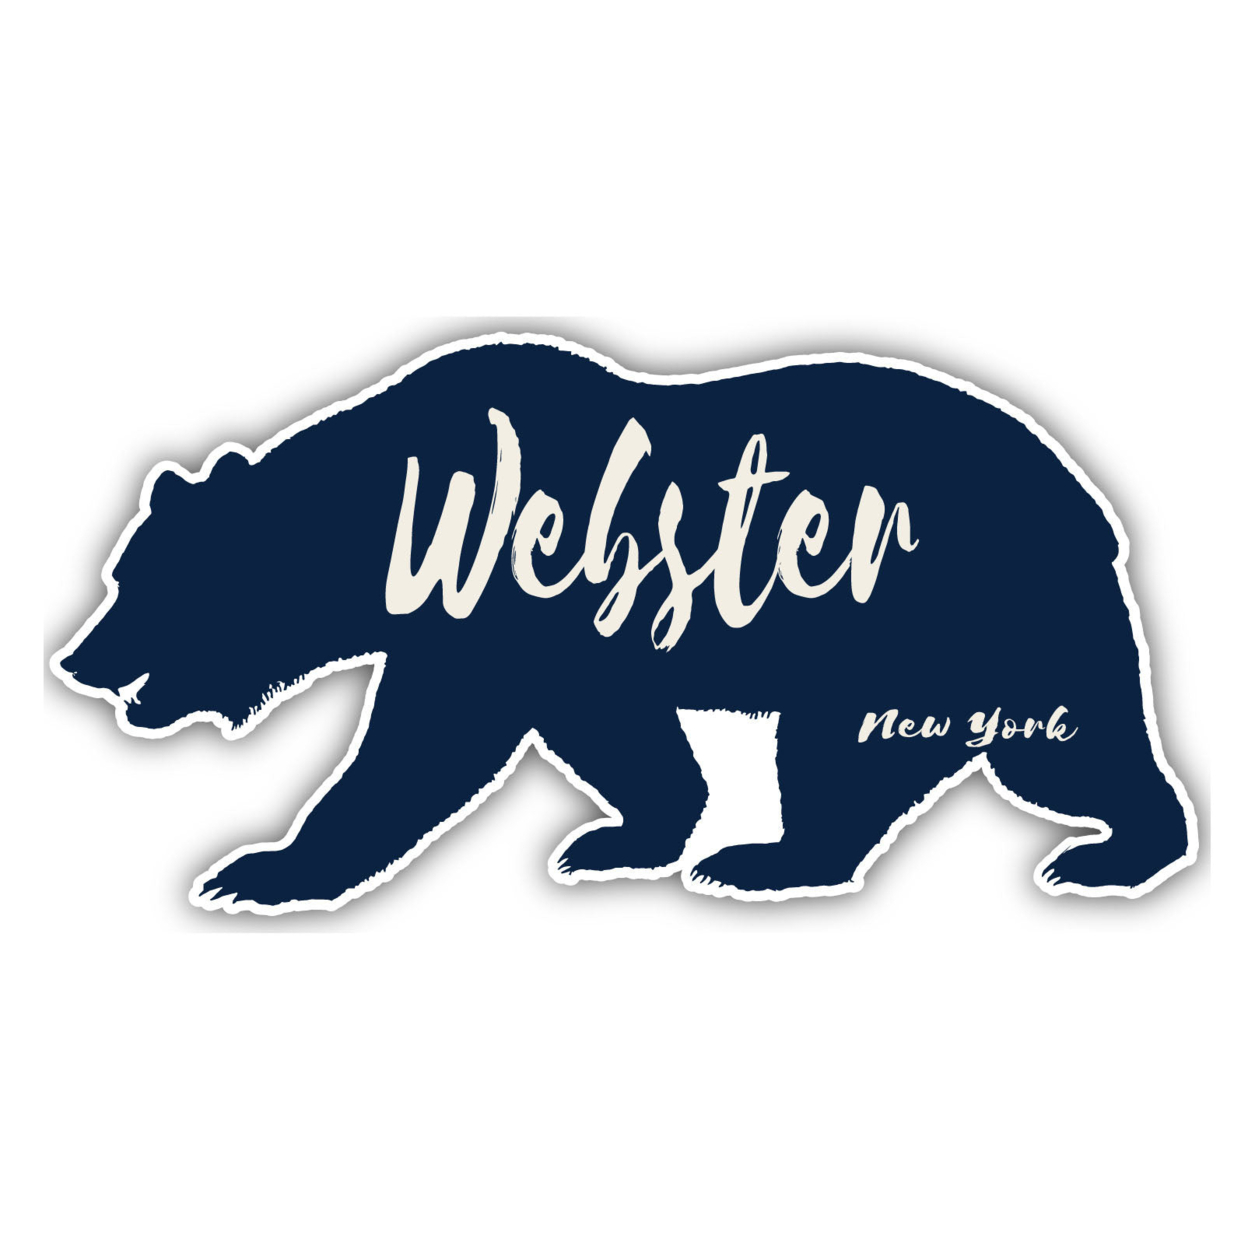 Webster New York Souvenir Decorative Stickers (Choose Theme And Size) - Single Unit, 2-Inch, Bear